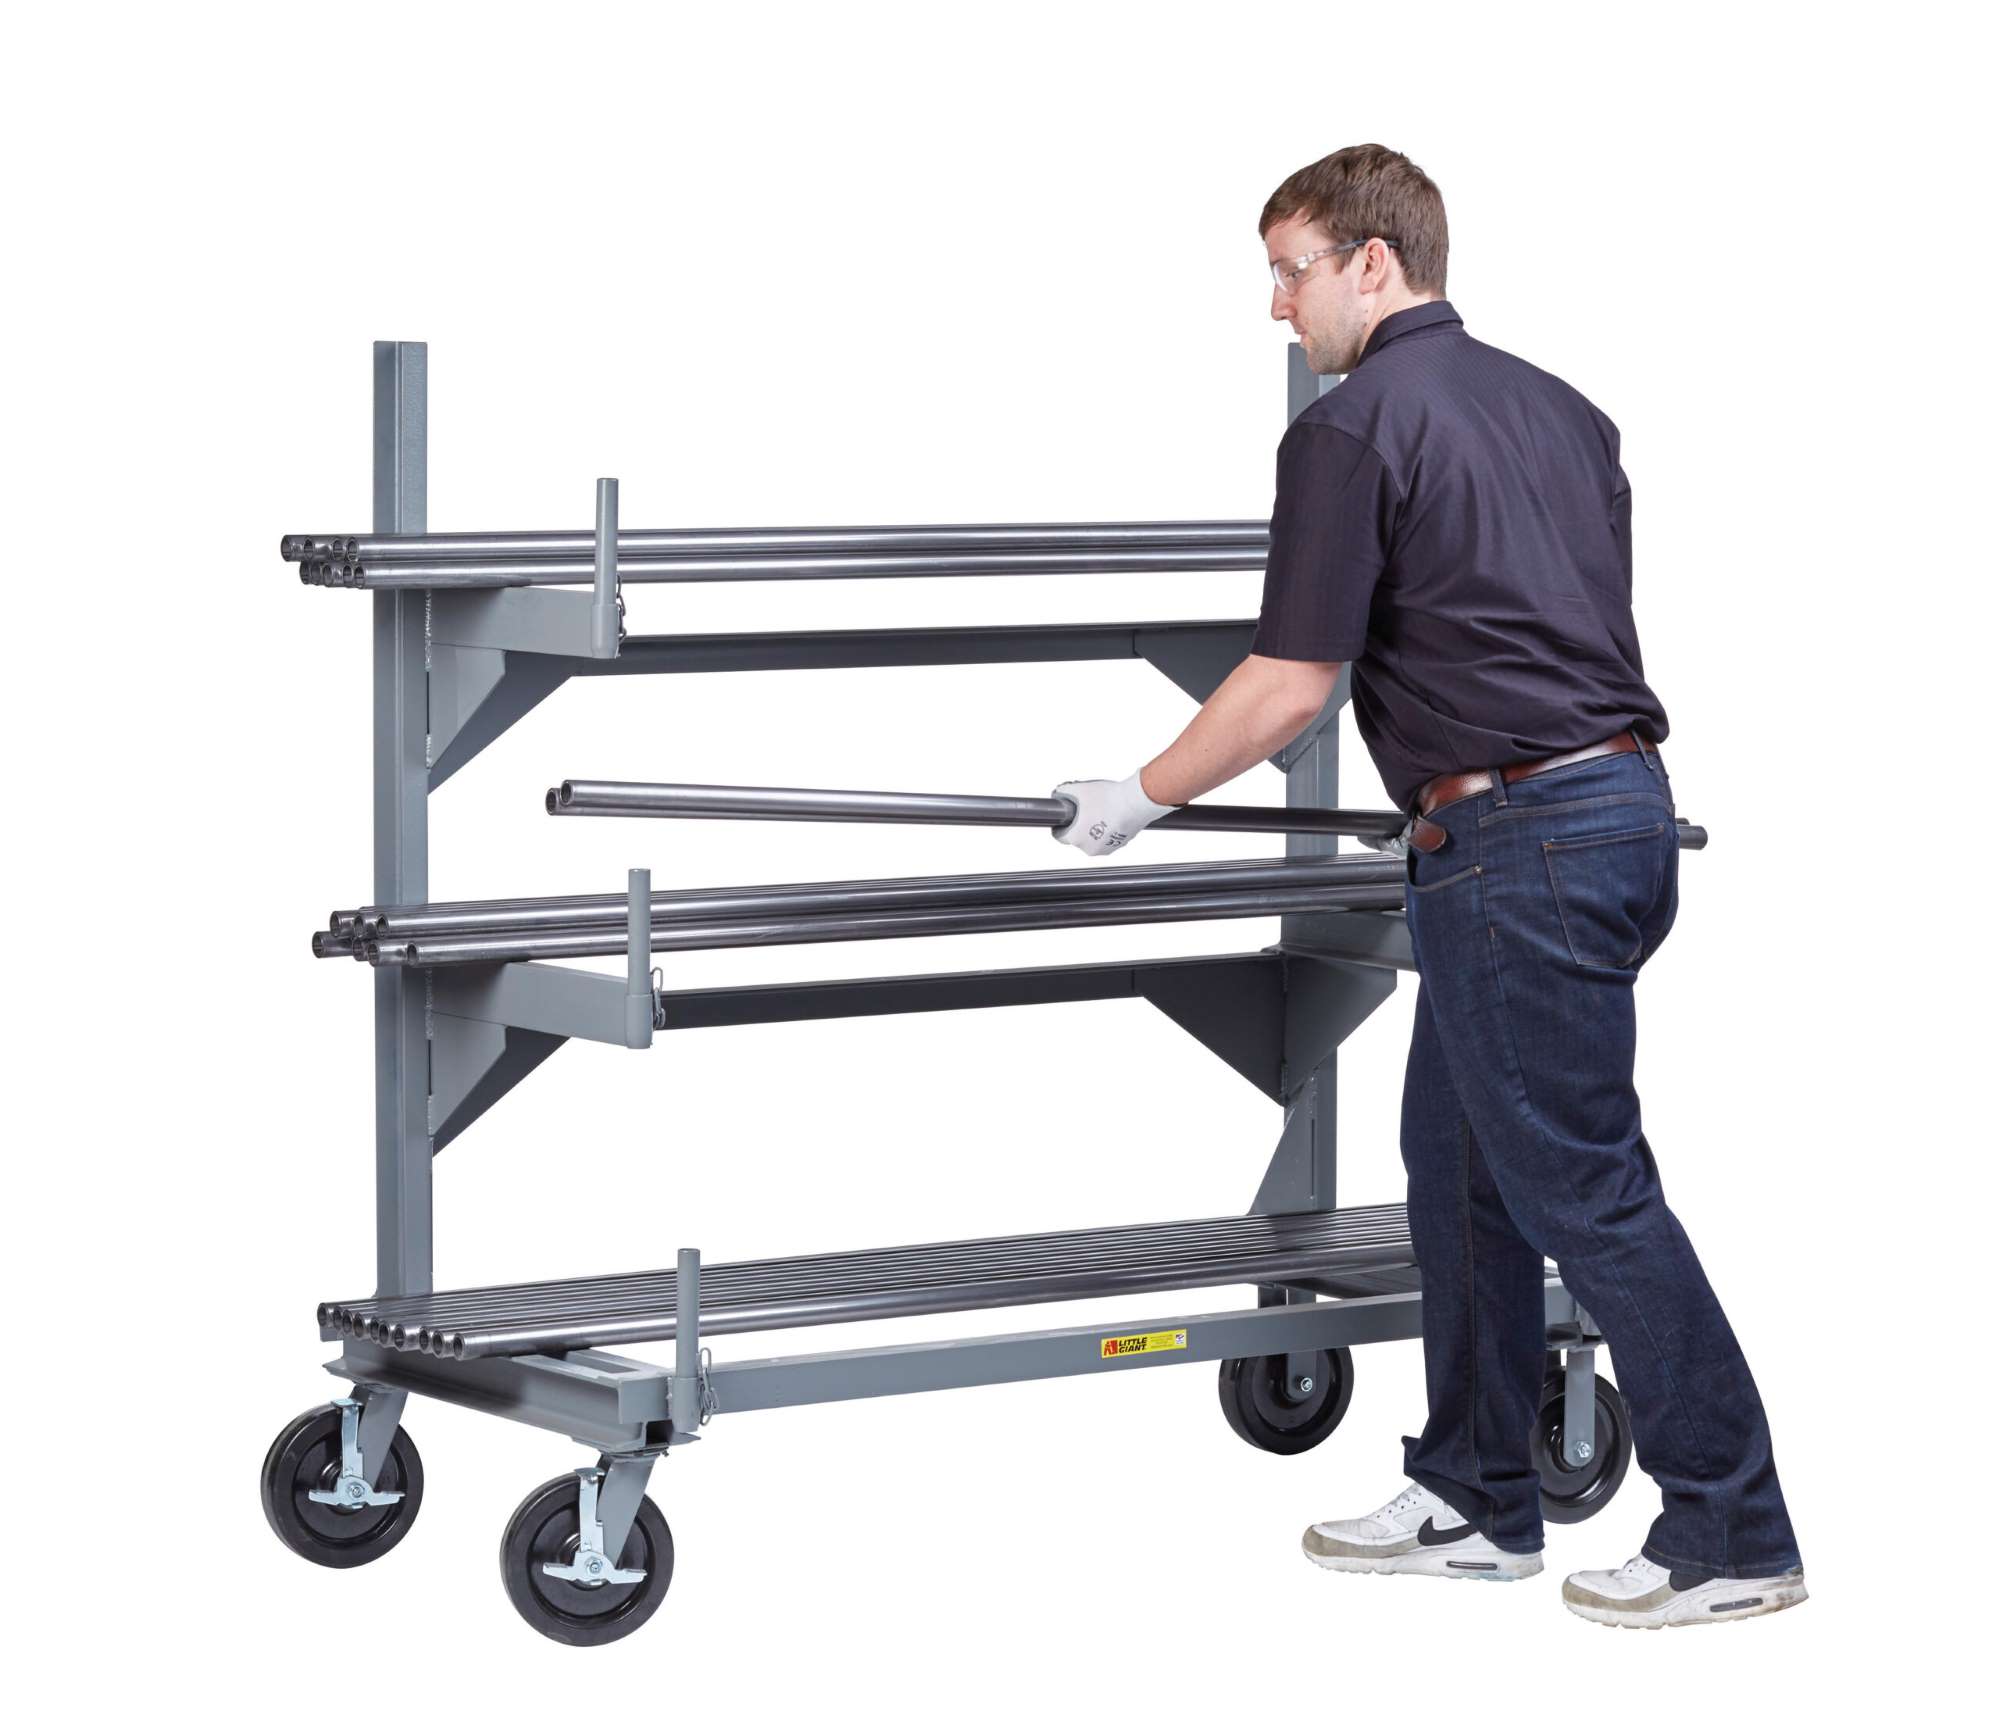 Little Giant mobile cantilever rack, 1500 lbs level capacity, 4000 lbs total capacity, removable retainer pipes, Overall height 61", 8" wheels